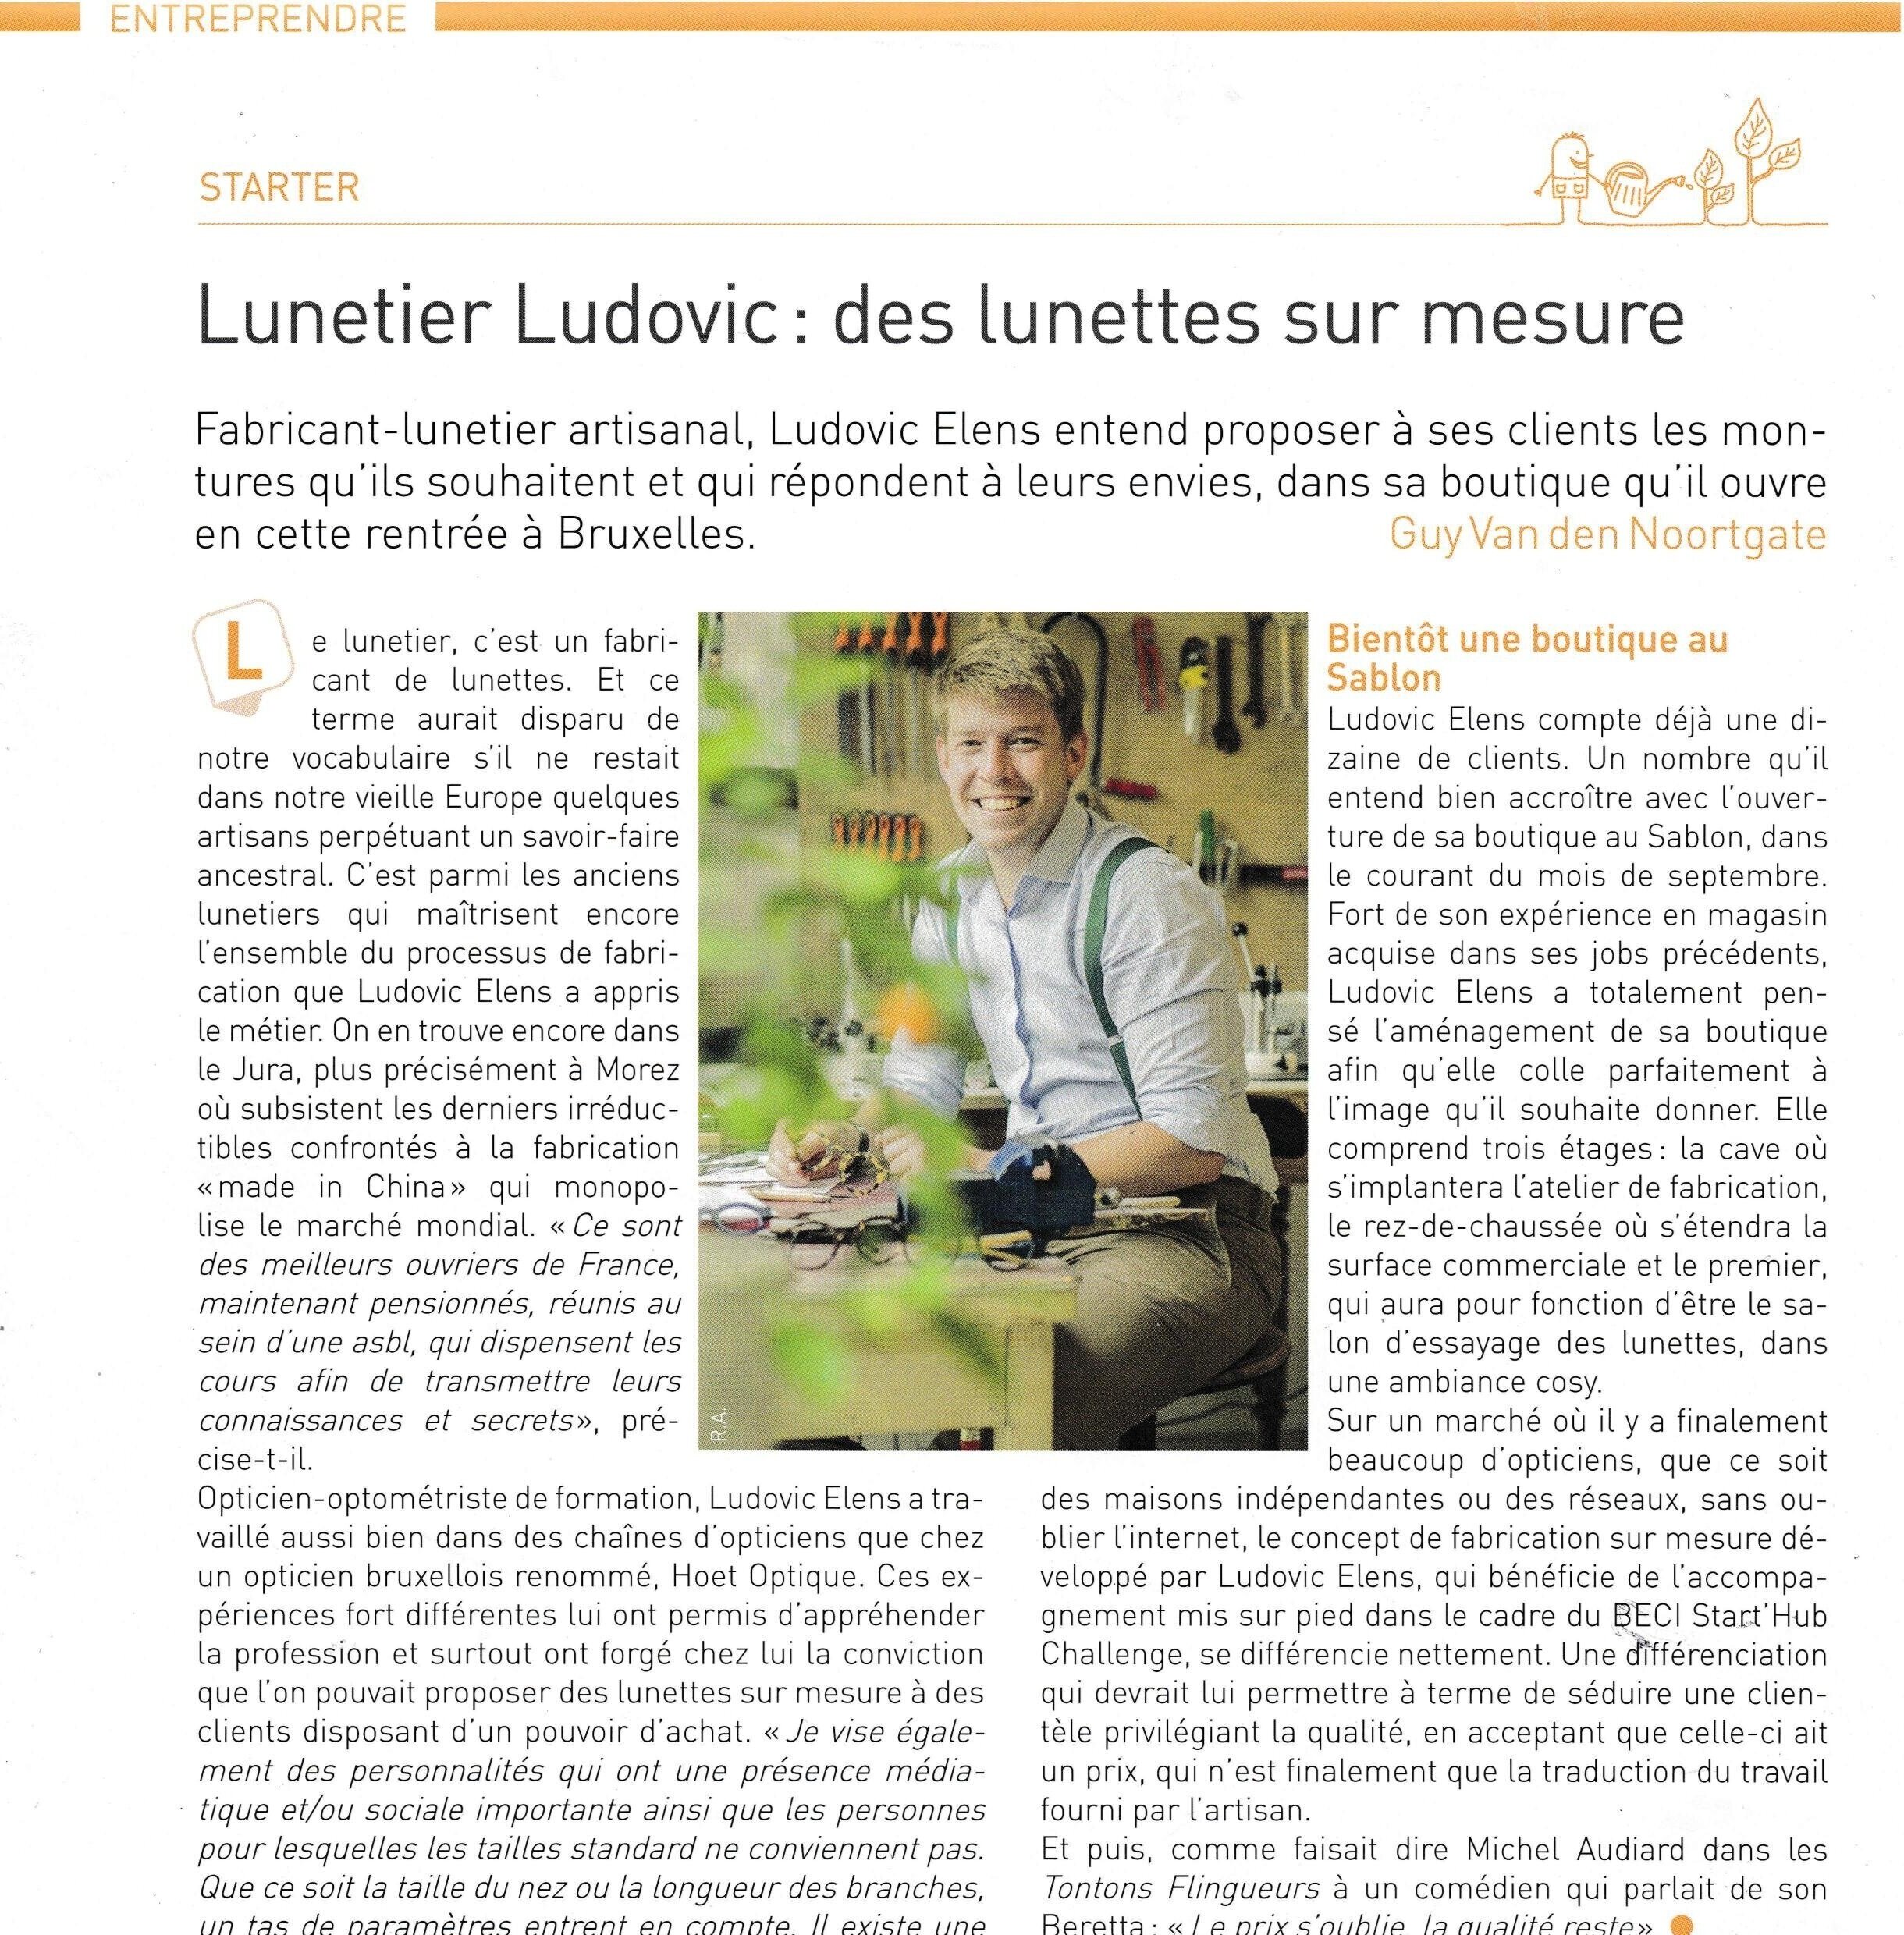 Lunetier Ludovic made to measure glasses